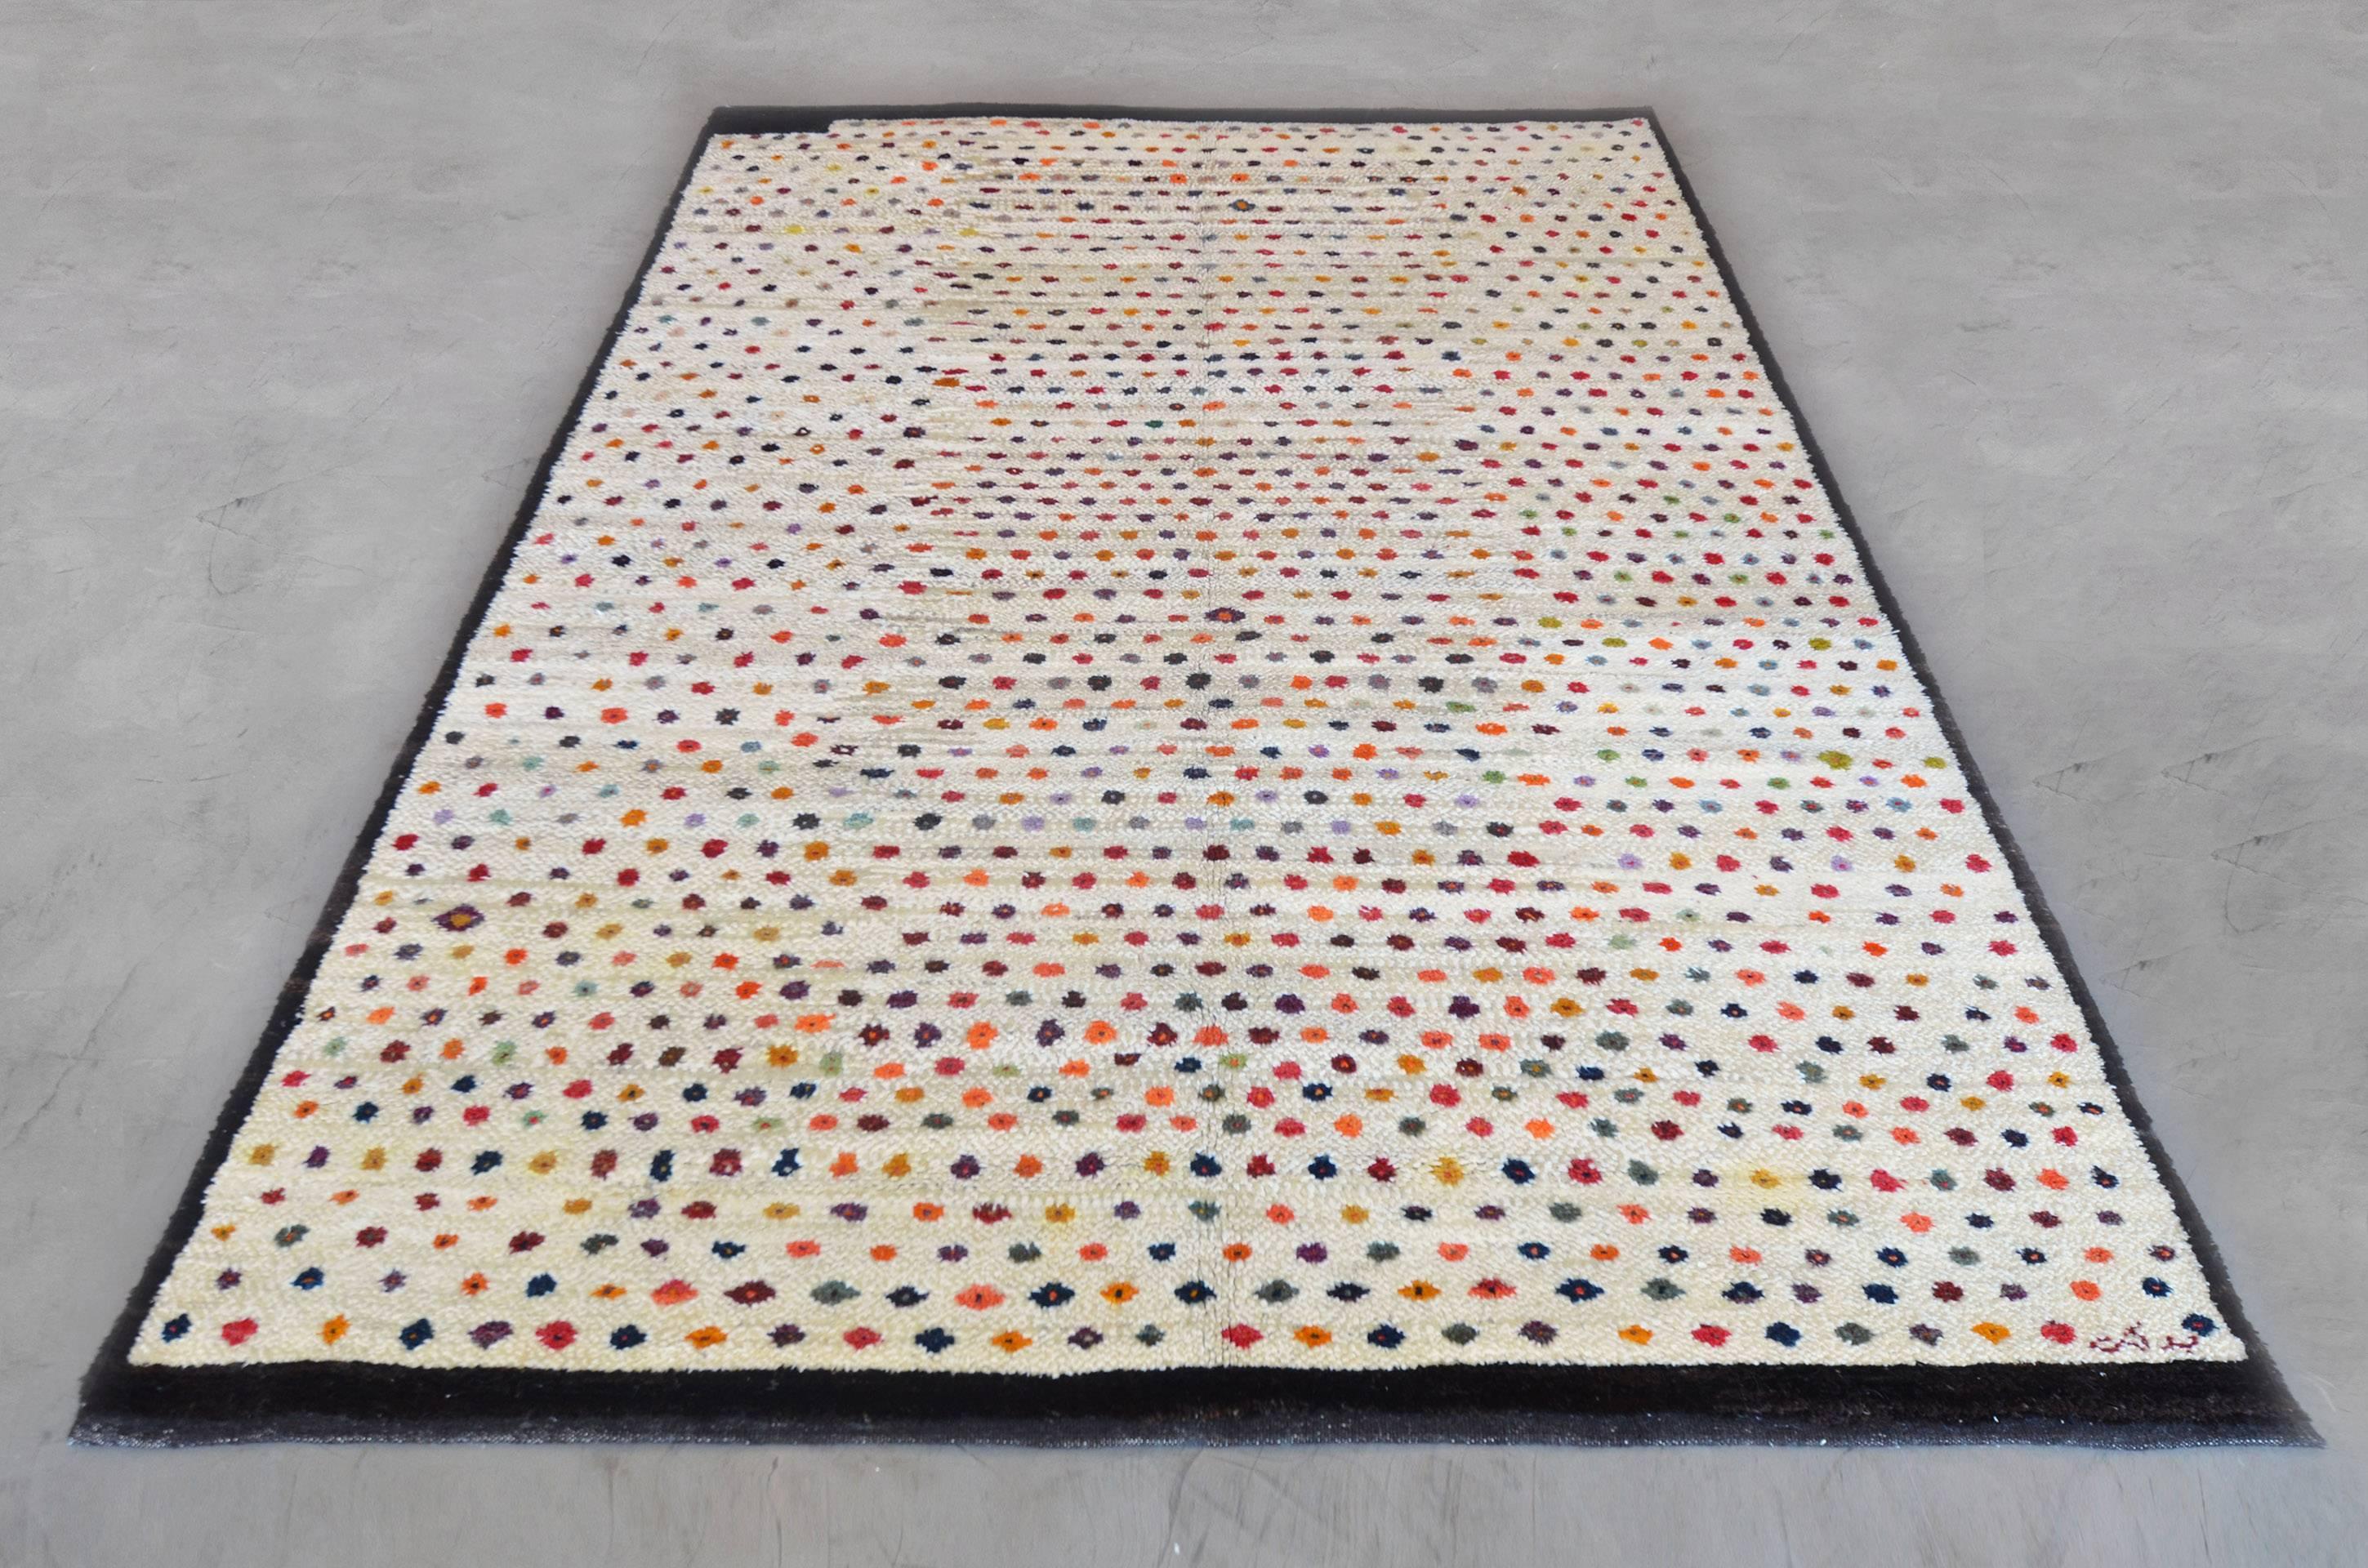 A one of a kind, hand-knotted Turkish wool and soft hemp rug from the 70s. This 6’7” x 9’ rug’s whimsical design is created by polychromatic dots scattered across a neutral beige field - framed by a strong border. The nature of this rug adds a